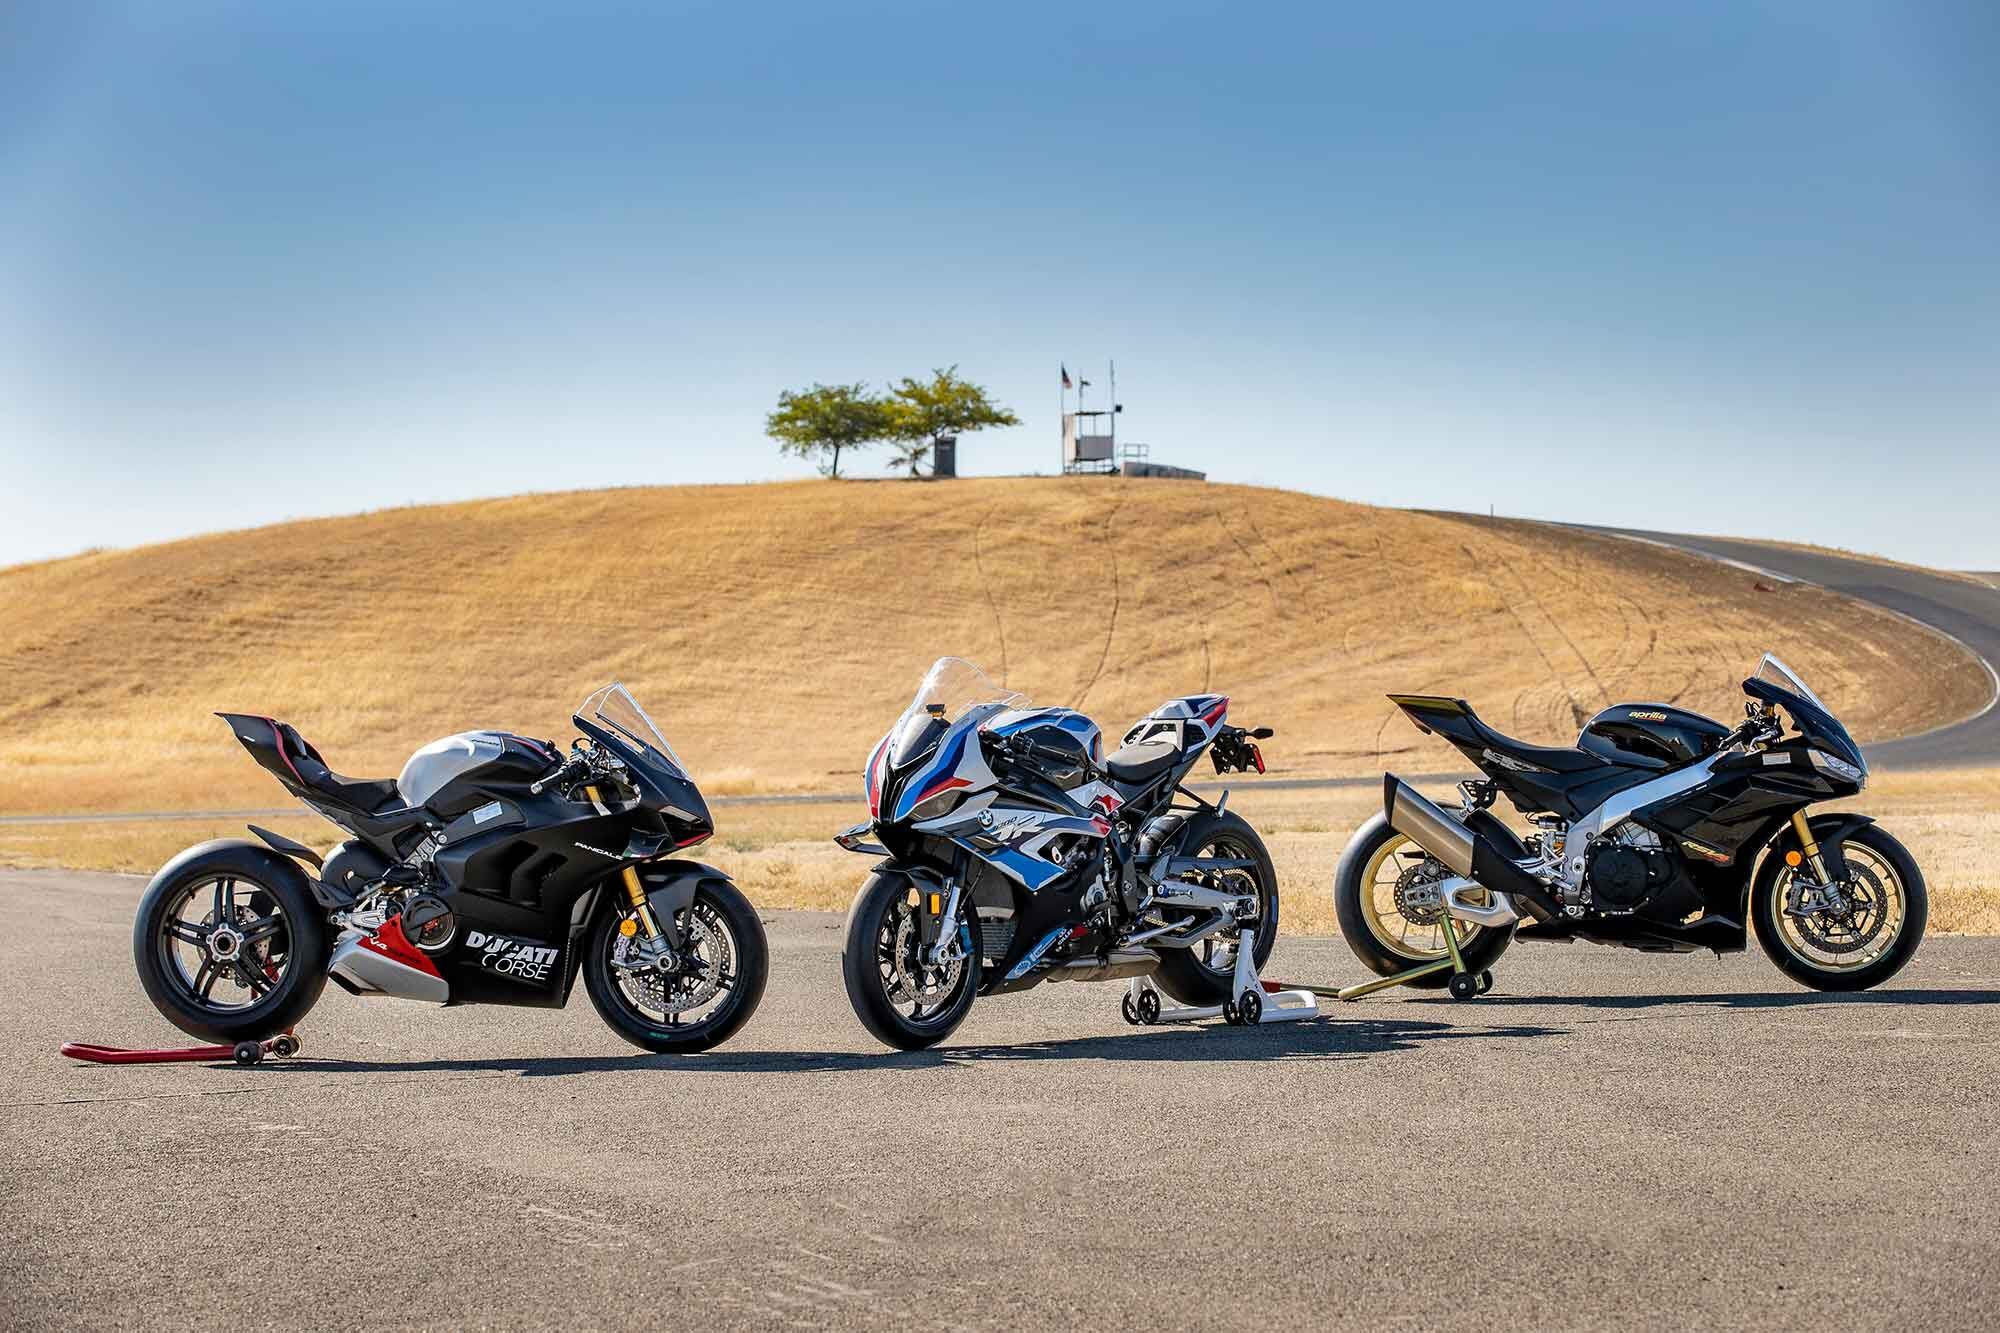 The Superbike Shootout Class of 2022—the reigning champion Aprilia RSV4 Factory, the homologation-special repli-racer BMW M 1000 RR, and the tricked-out Ducati Panigale V4 SP2.